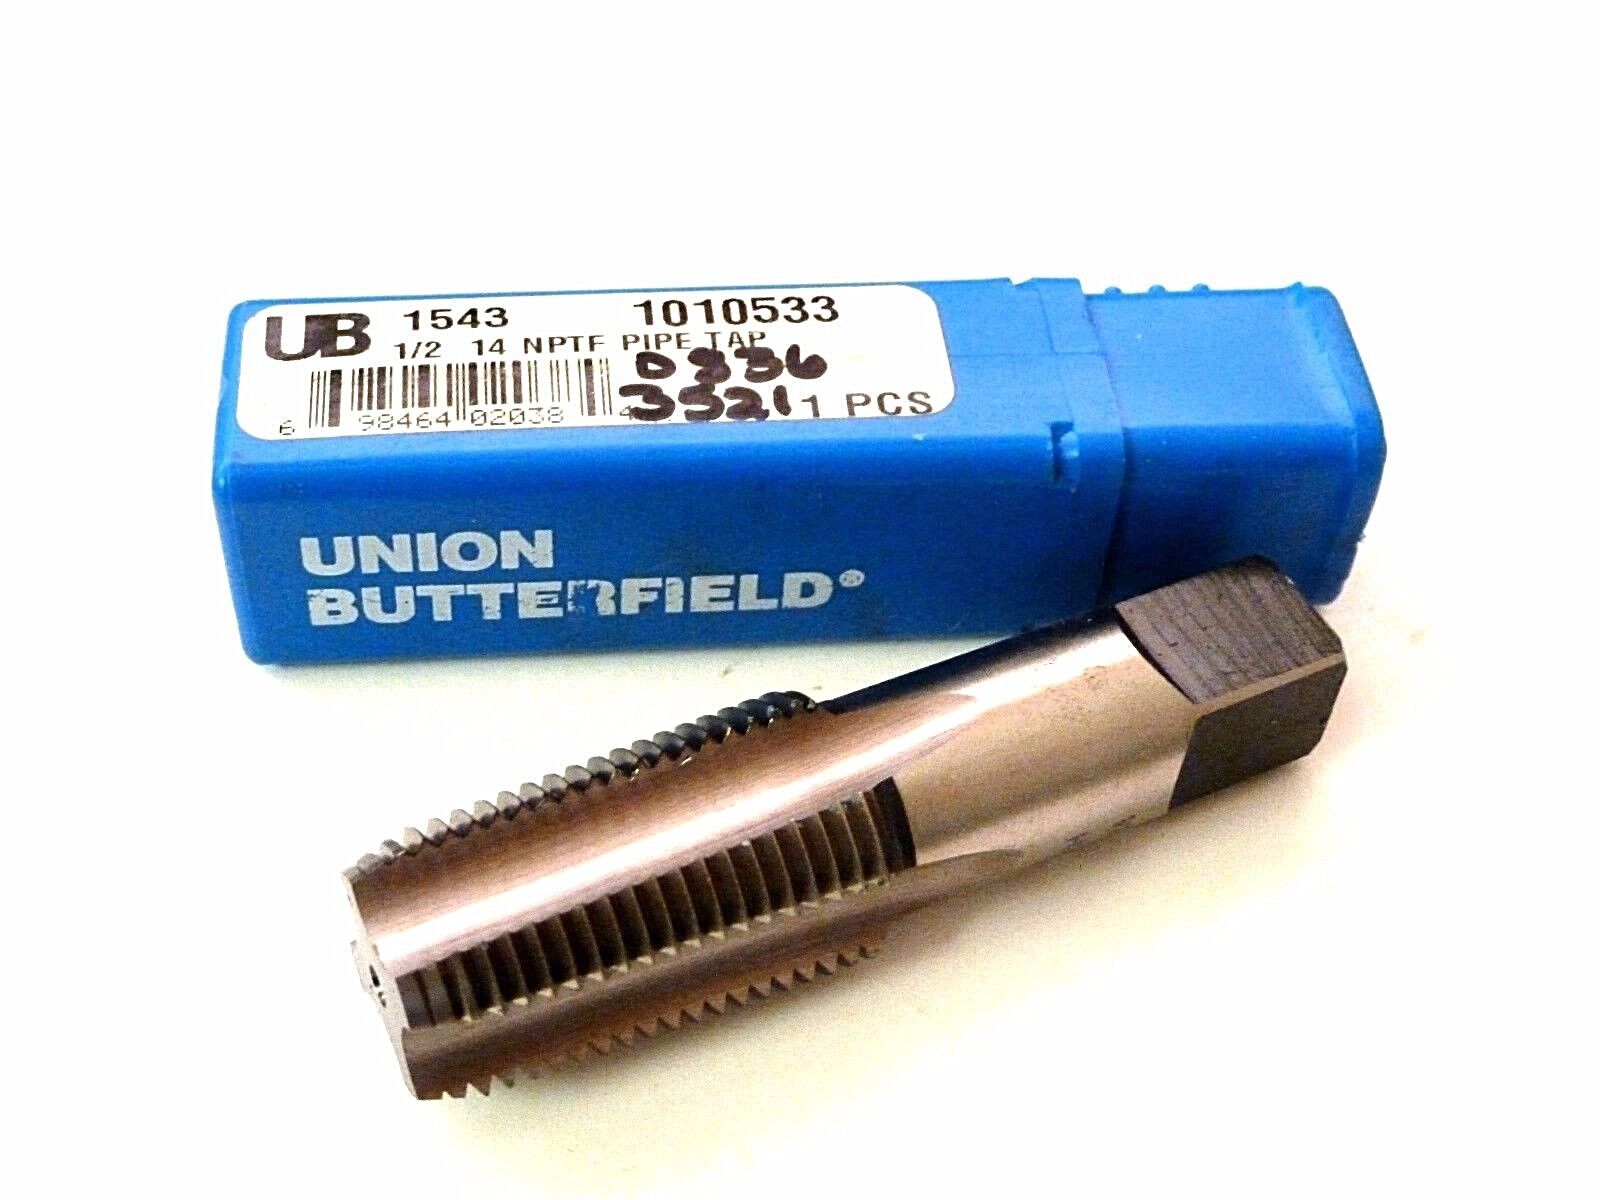 NEW UNION BUTTERFIELD 1543 1010533 1/2 14 NPTF PIPE TAP 0836-3521